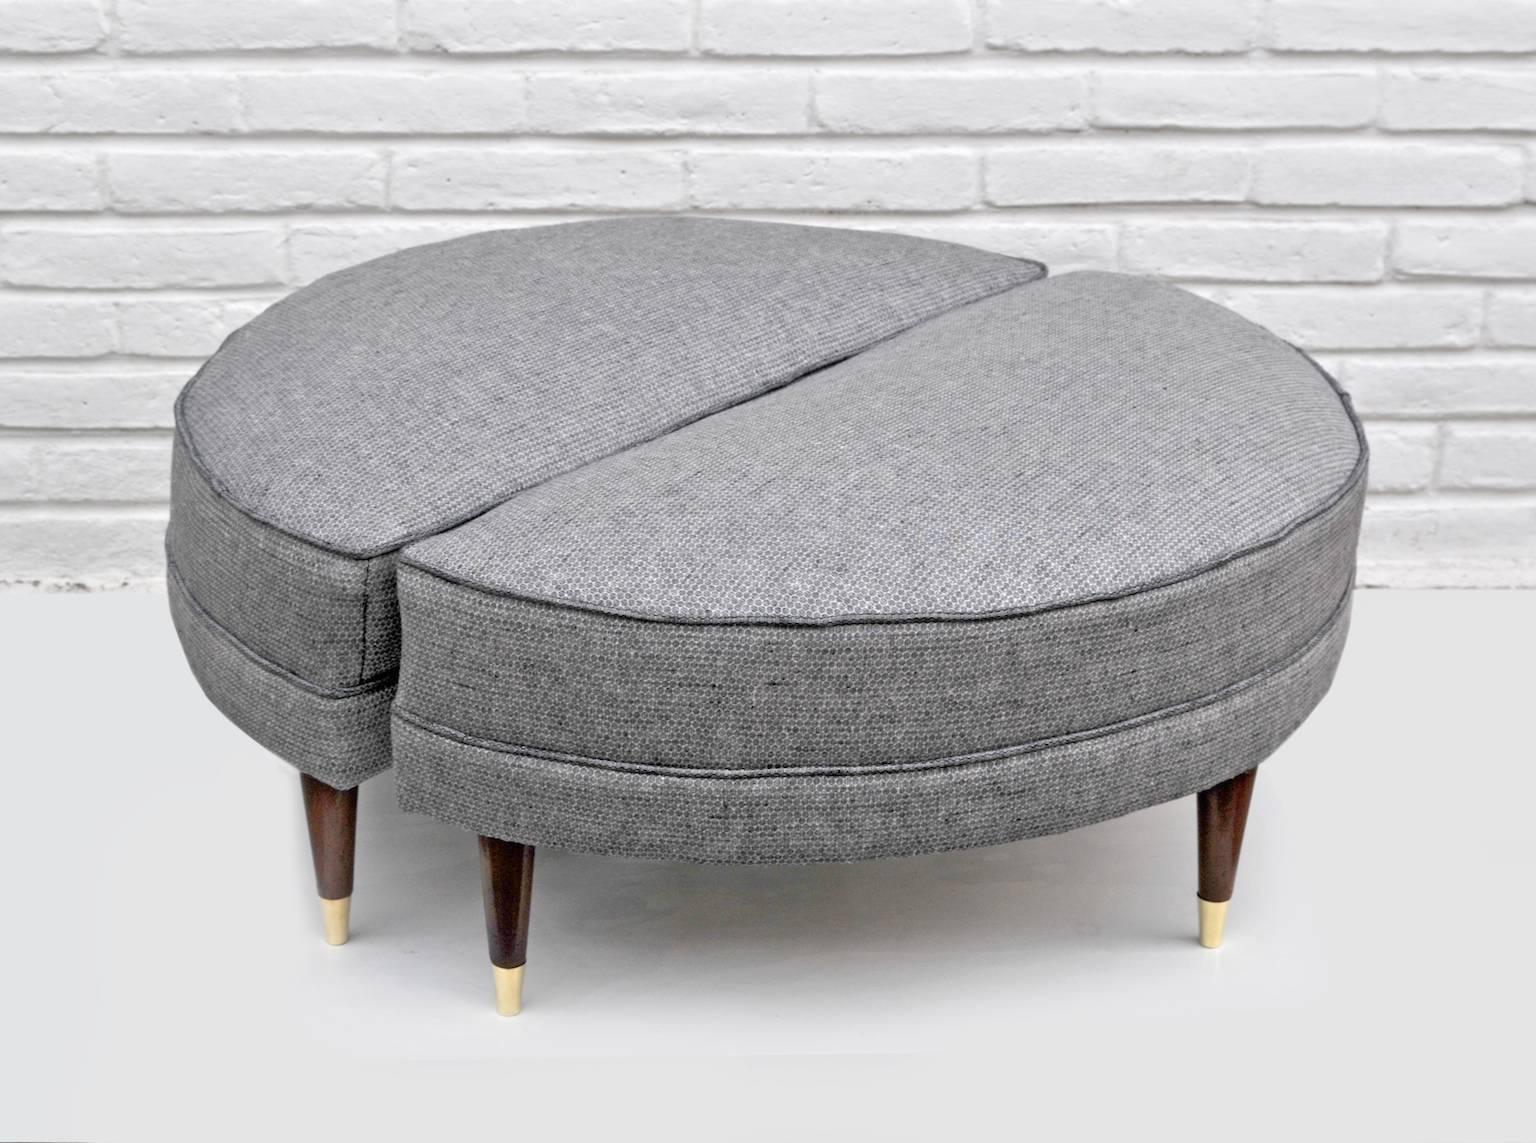 Each of these charming semicircular ottomans has four fruitwood legs with gold toned metal-capped feet. Upholstered in black and creme linen.